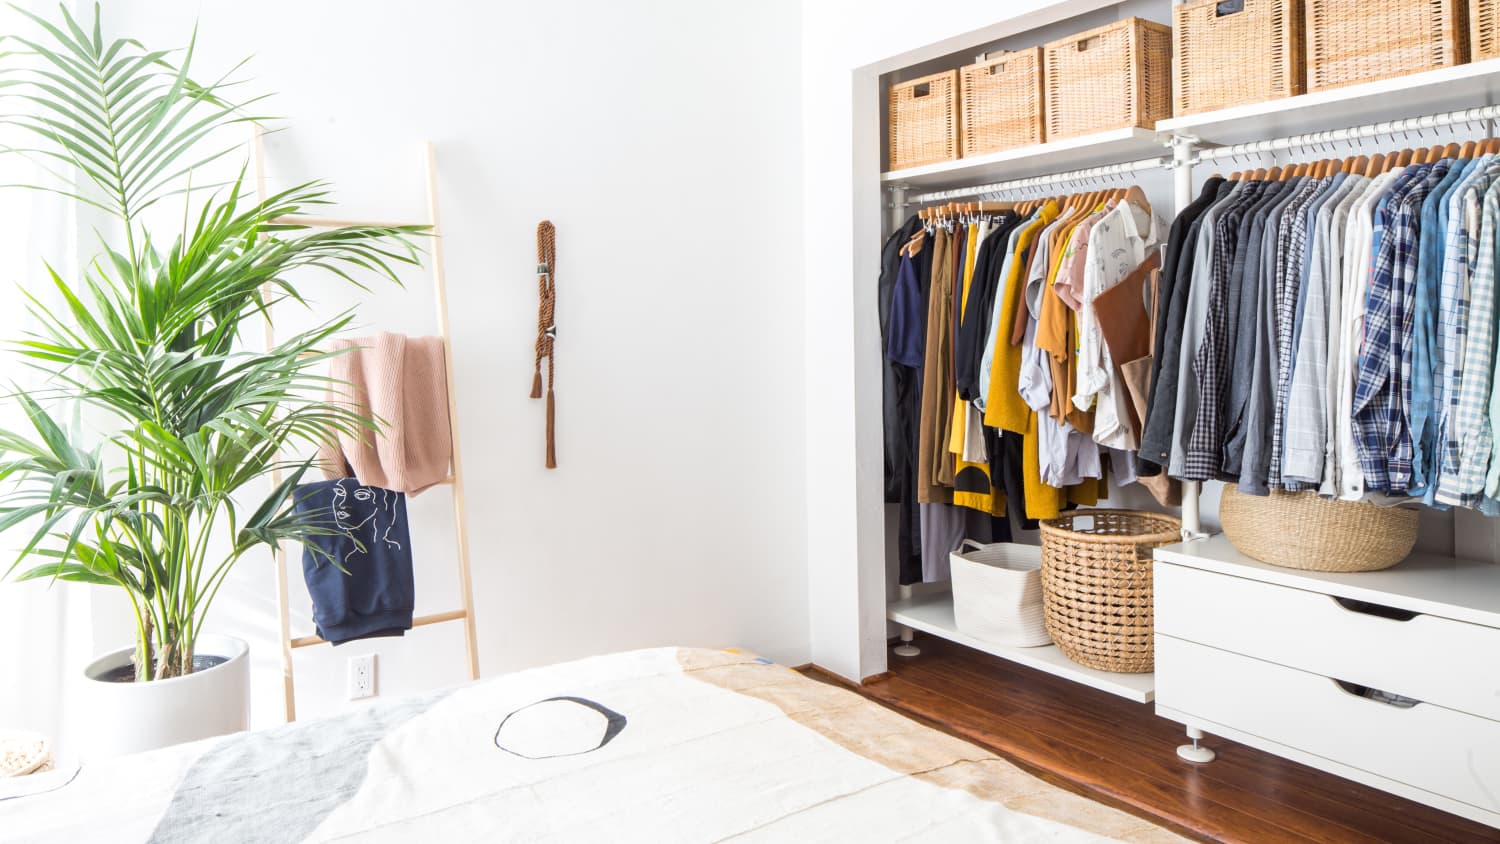 9 Bedroom Organizing Tips to Use Right Now